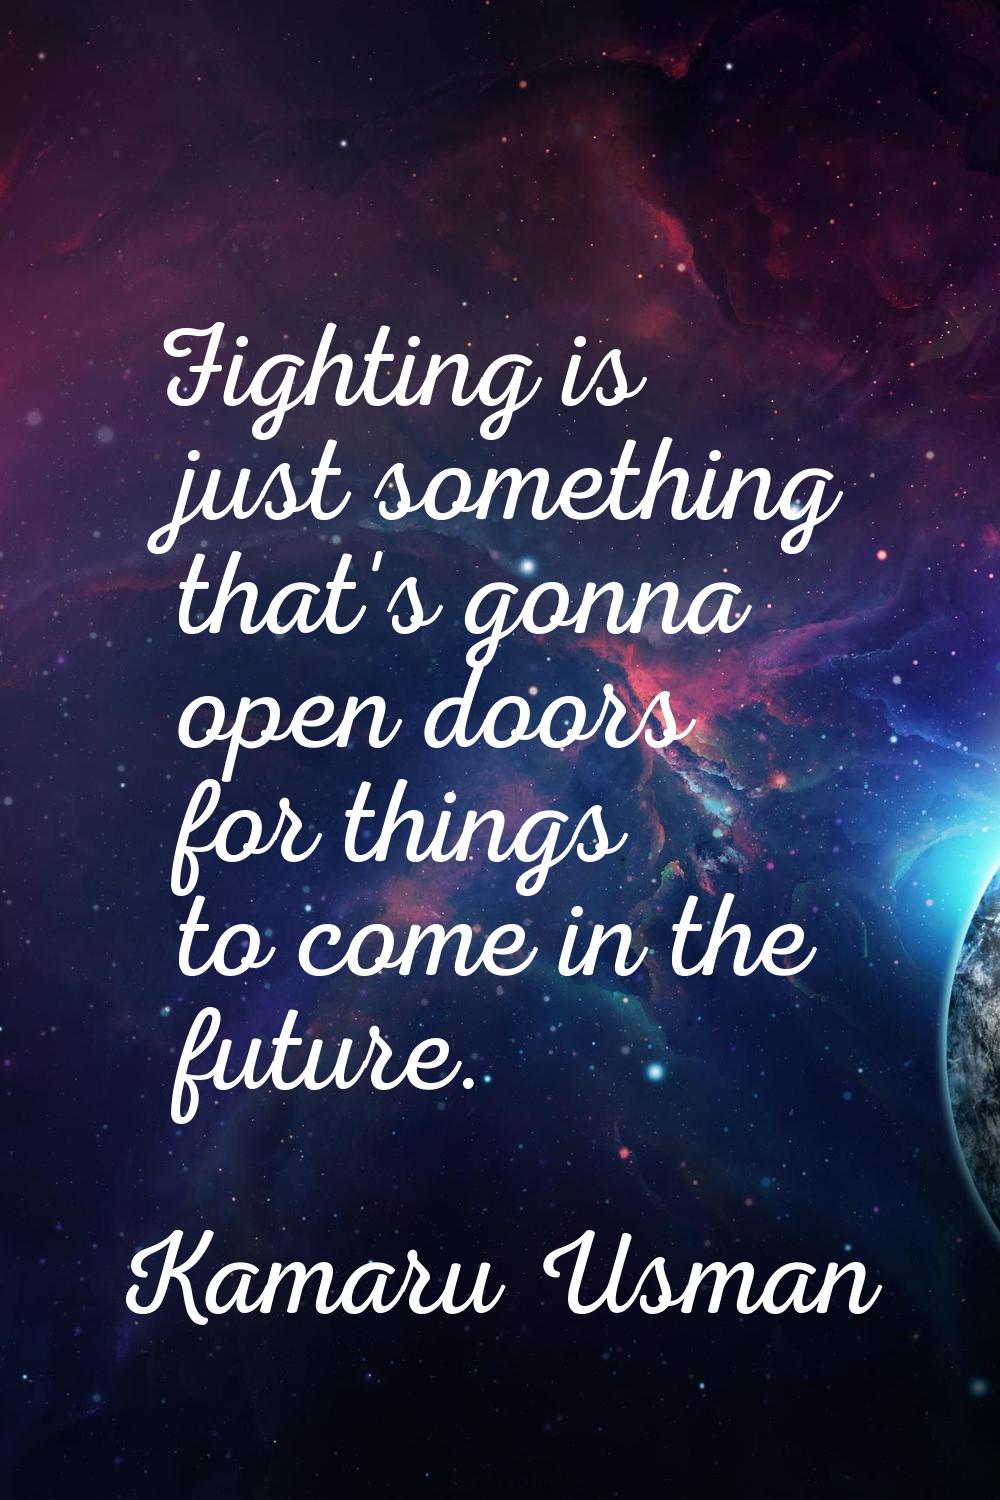 Fighting is just something that's gonna open doors for things to come in the future.